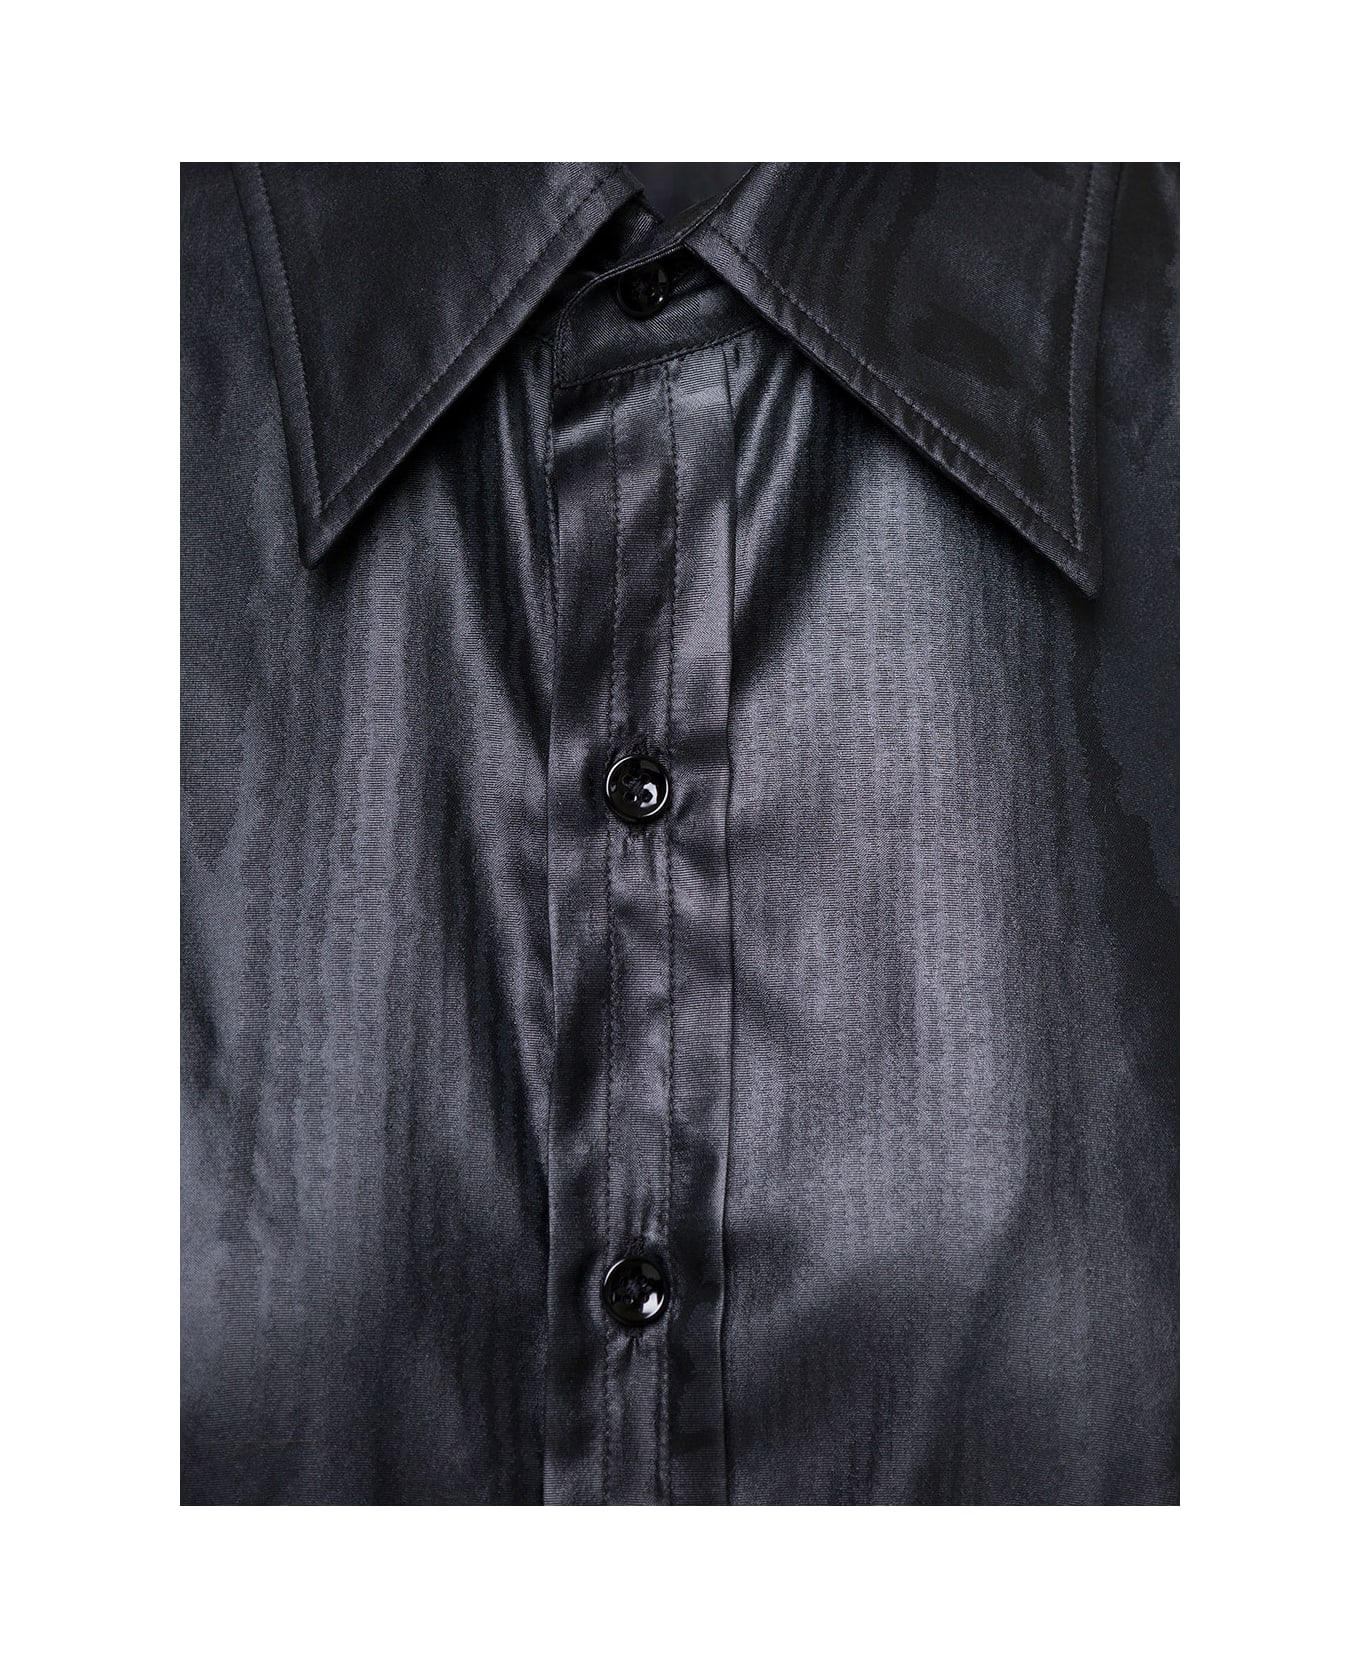 Maison Margiela Long Black Shirt With Classic Collar In Faux Leather Woman - Black